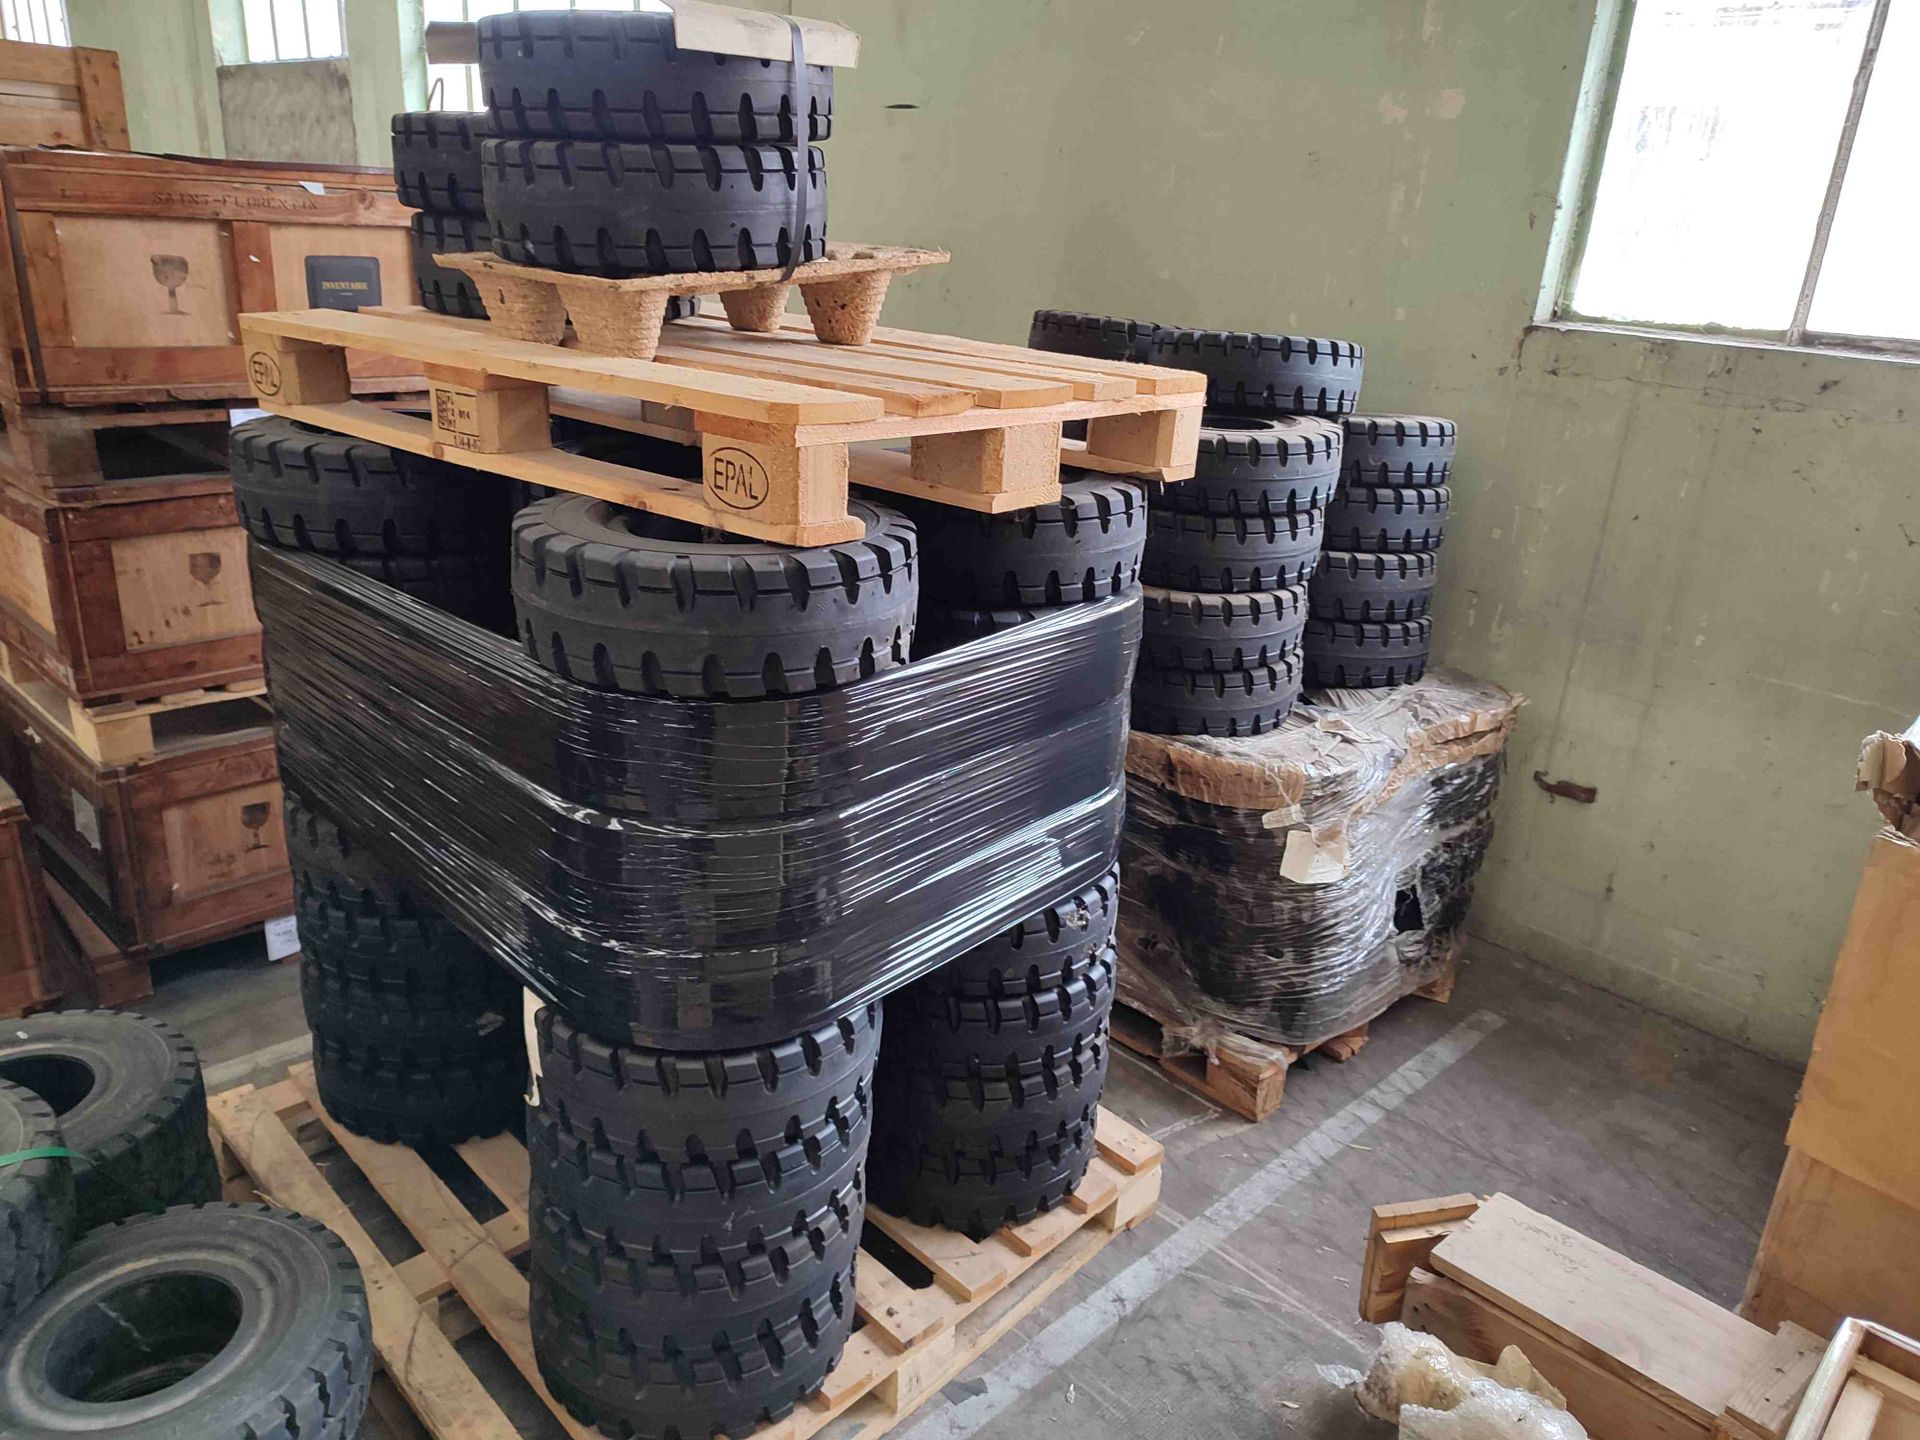 Null [RP] For professionals only.
Approximately 110 solid tires for forklifts, M&hellip;